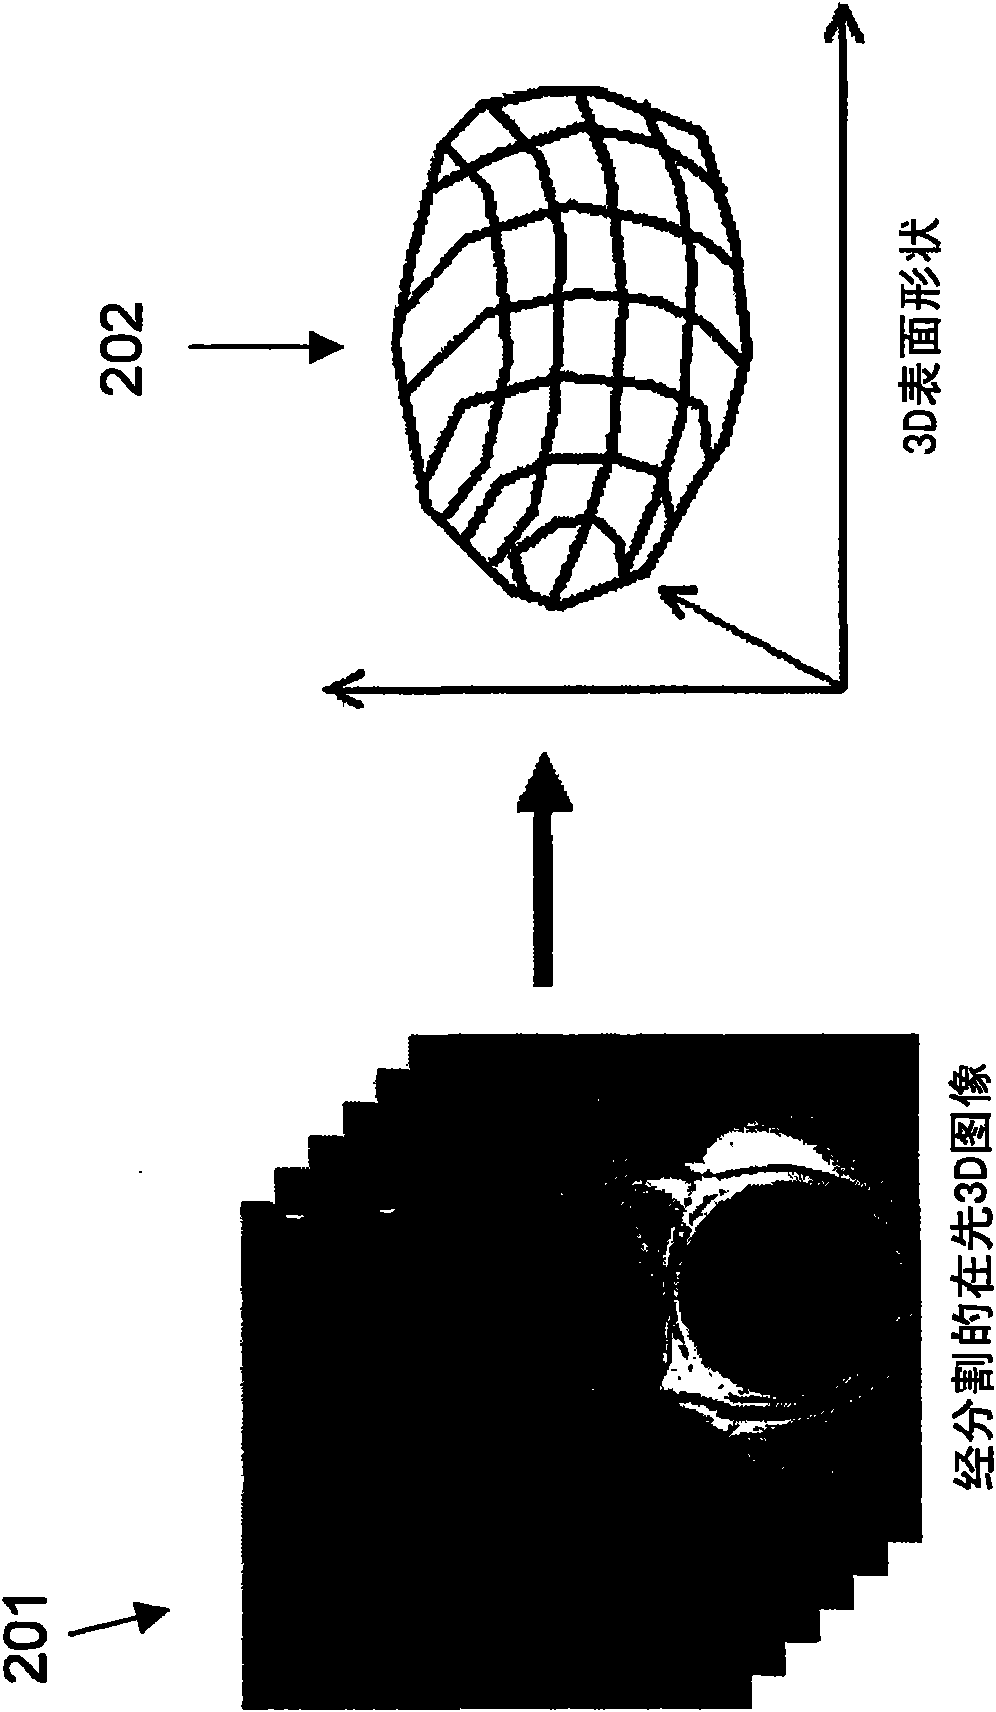 System and method for fusing real-time ultrasound images with pre-acquired medical images